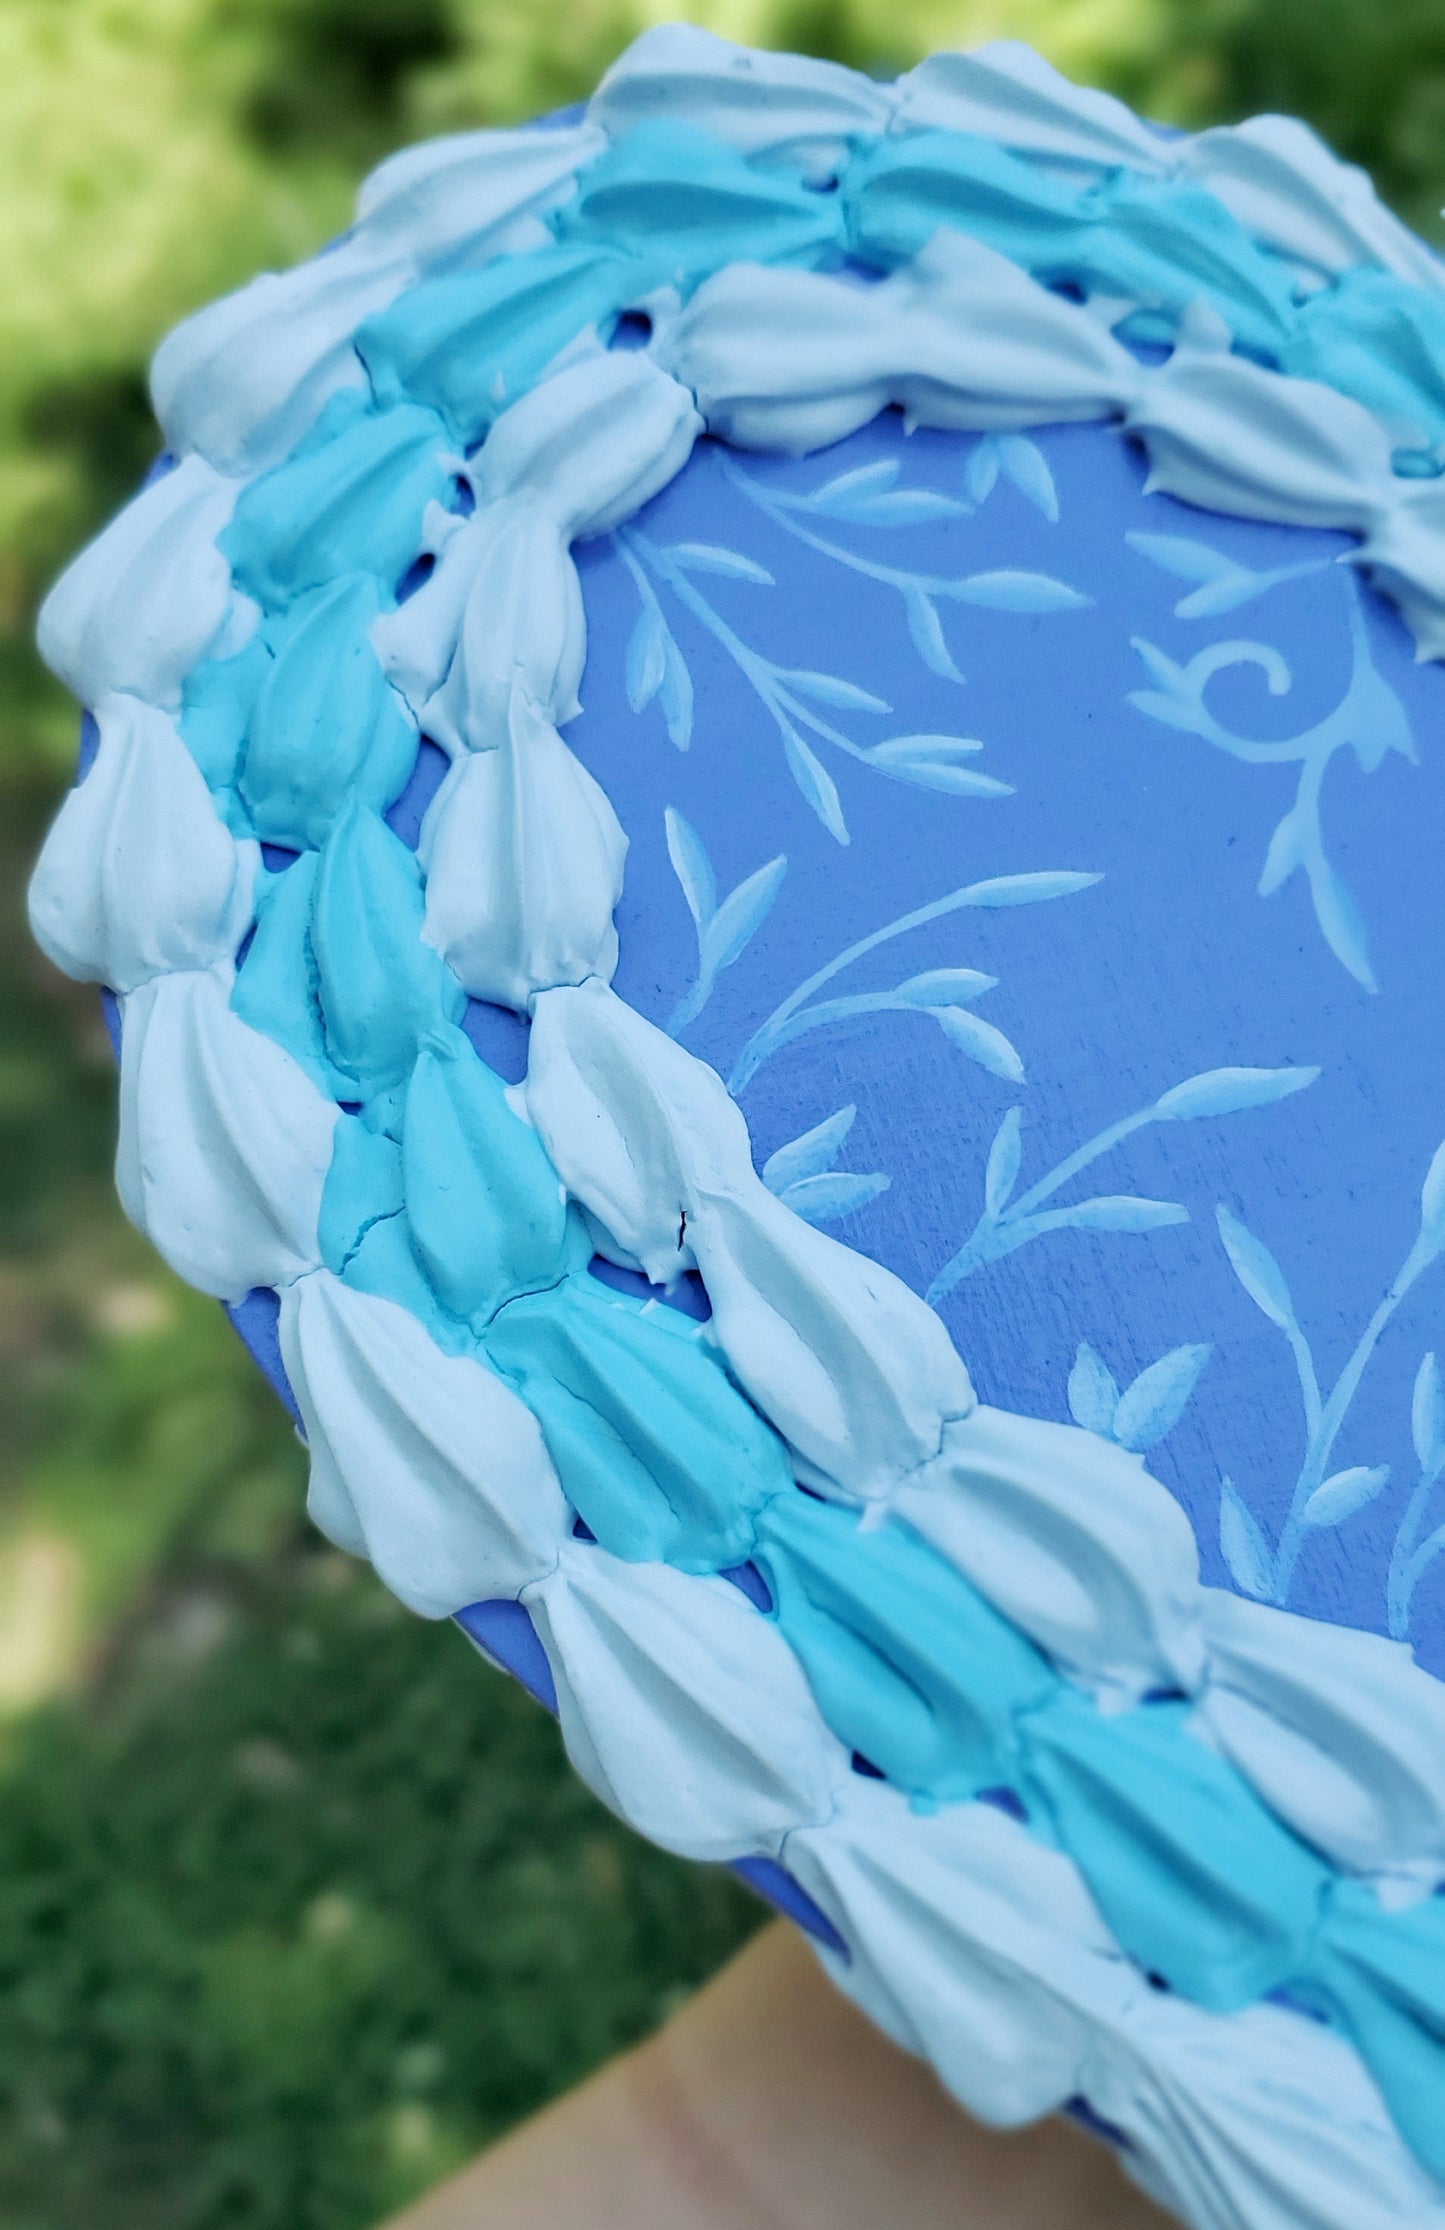 Textured Blueberry Cake Painting